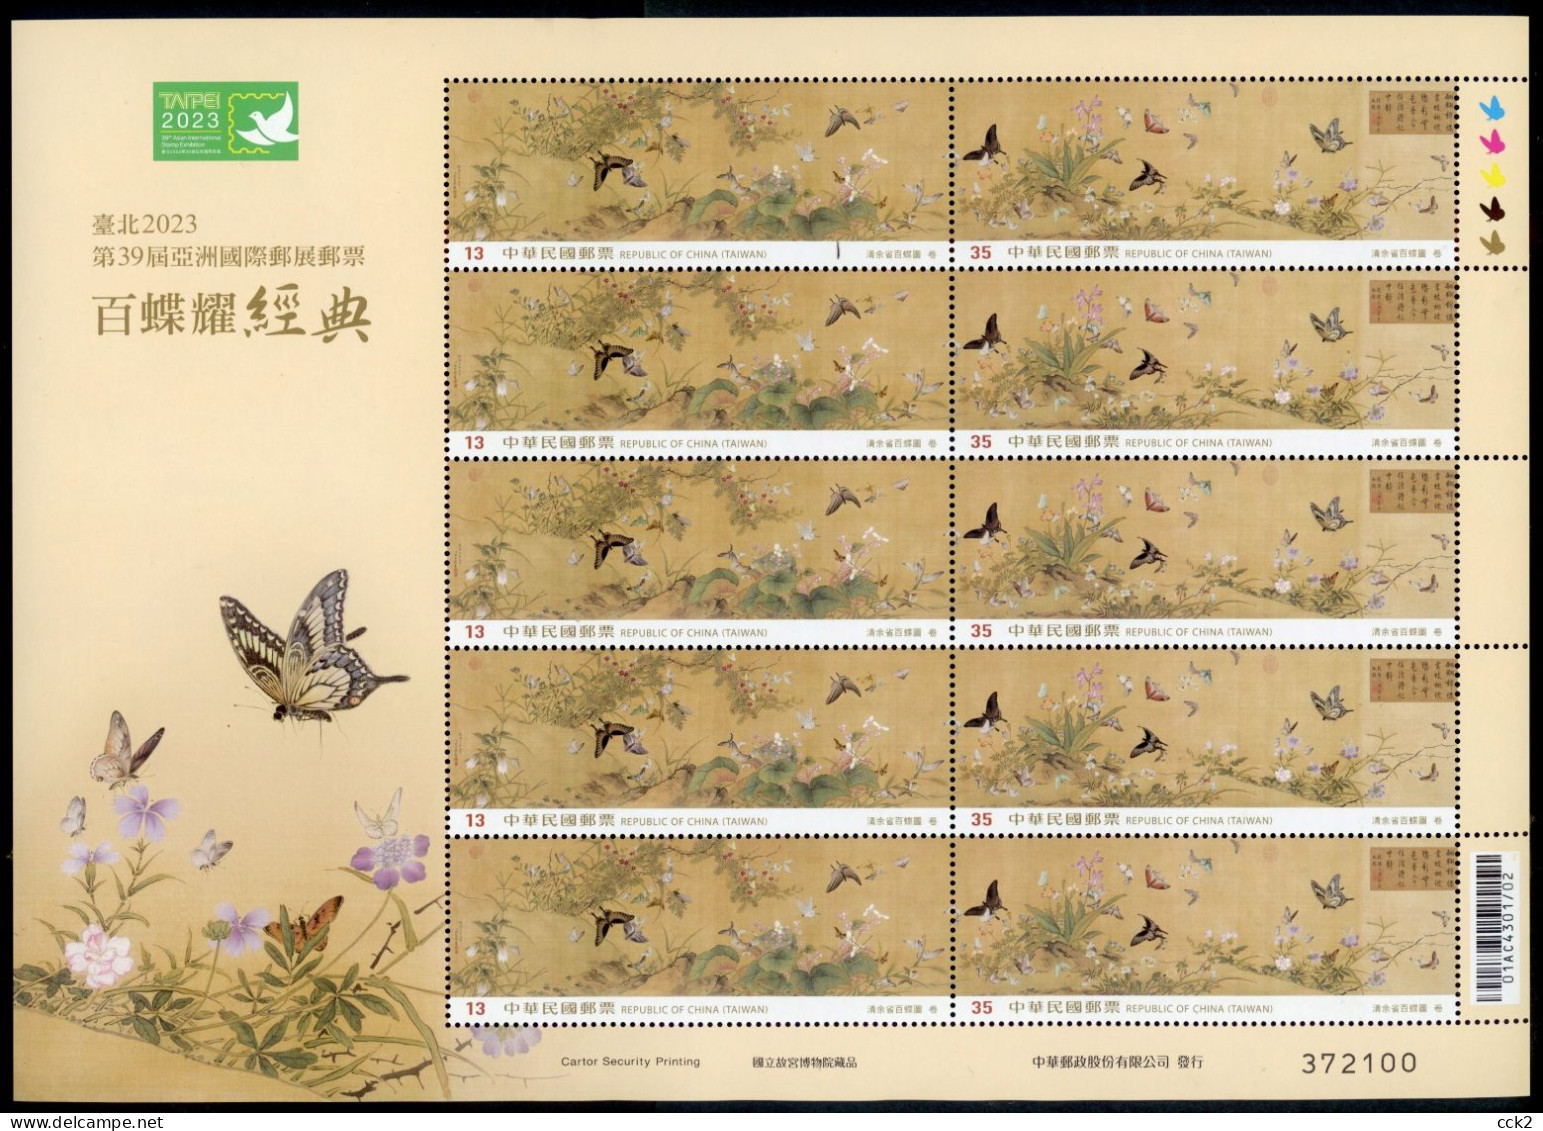 2023 Taiwan - R.O.CHINA -Myriad Butterflies Stamp Sheet (5 Sets.) - Unused Stamps